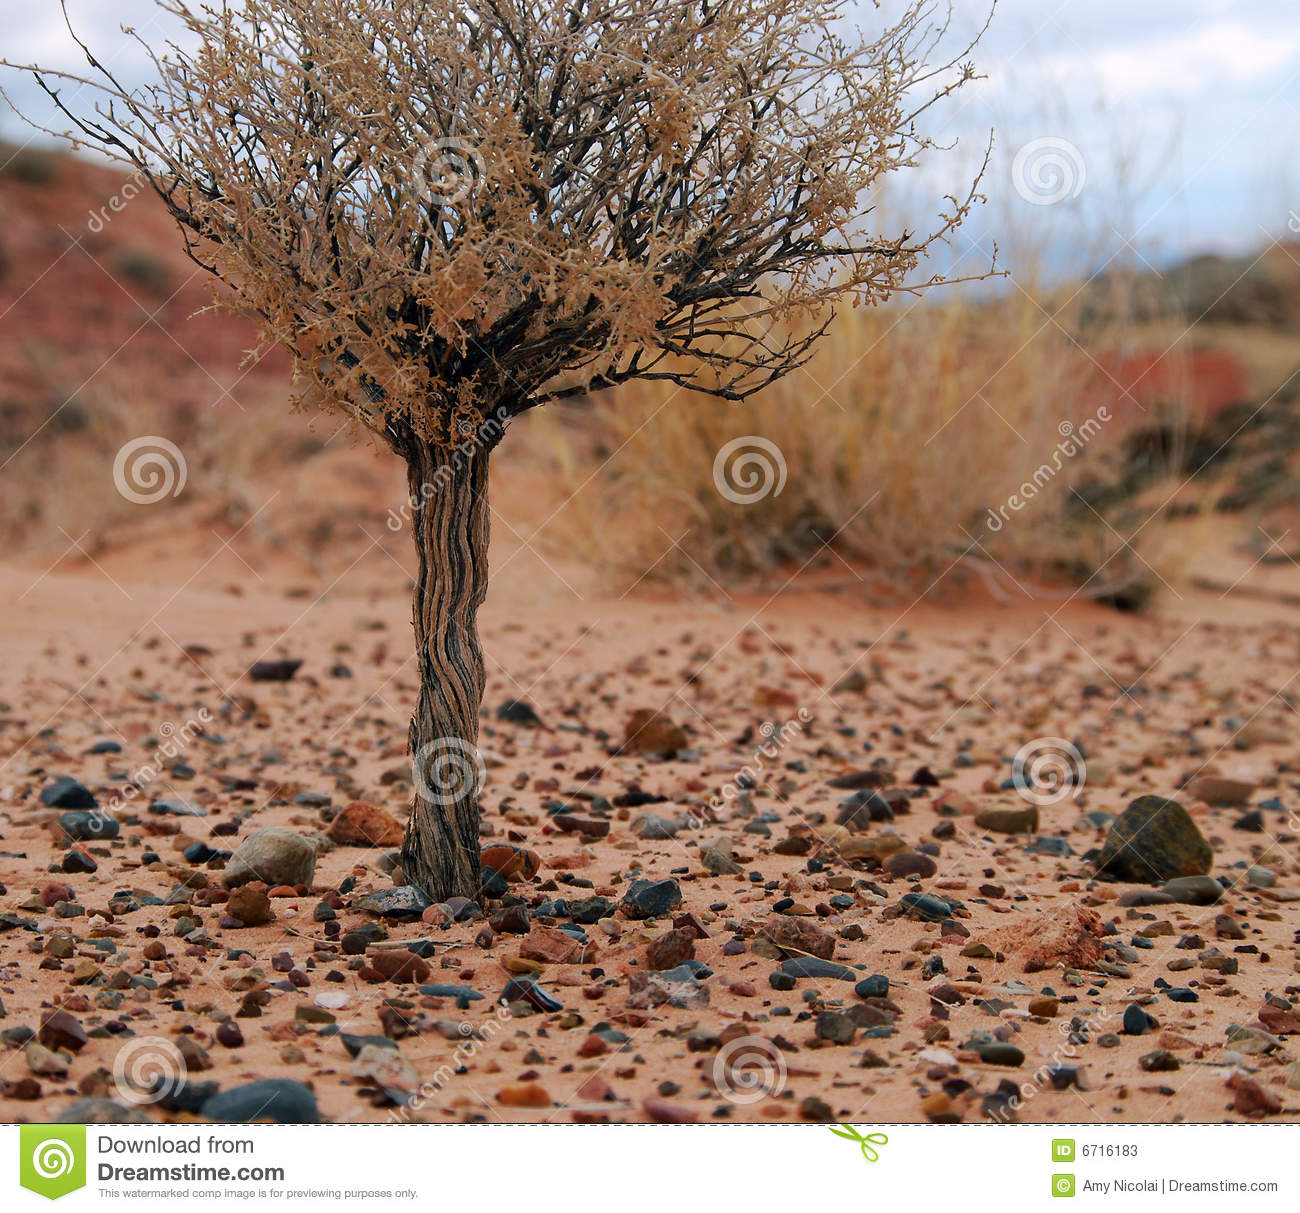 An Ancient Desert Shrub Rises Over The Desert Pebbles And Sand In The